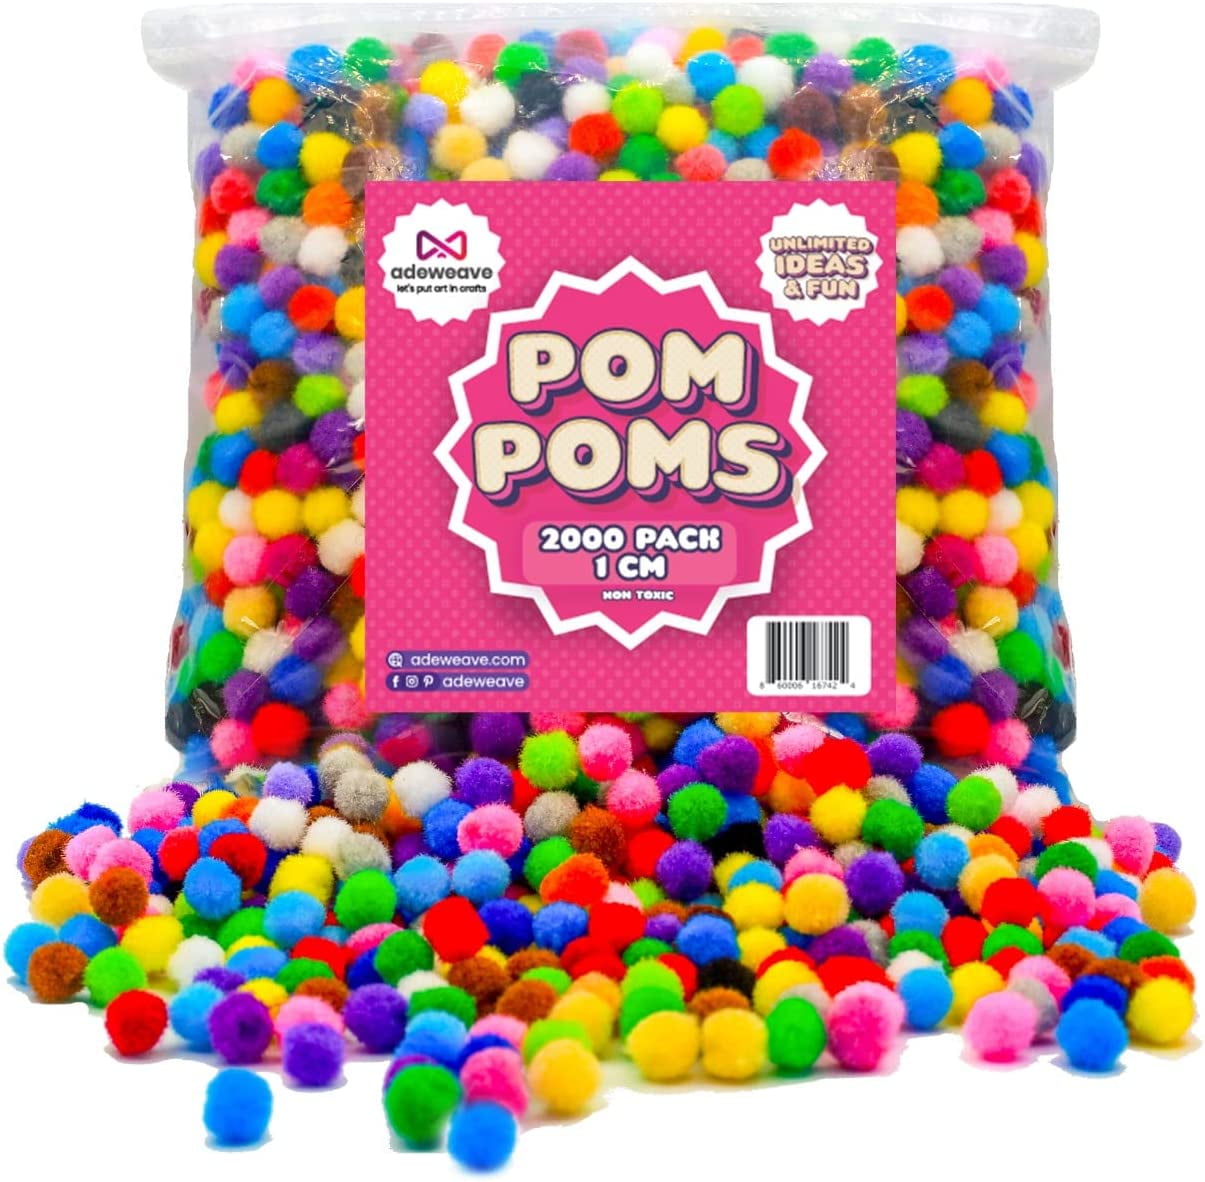 Adeweave 1.5 Inch 100 Pom Poms - Multicolor Pompoms for Crafts in Assorted  Colors Soft and Fluffy Large pom poms for Crafts in Reusable Zipper Bag